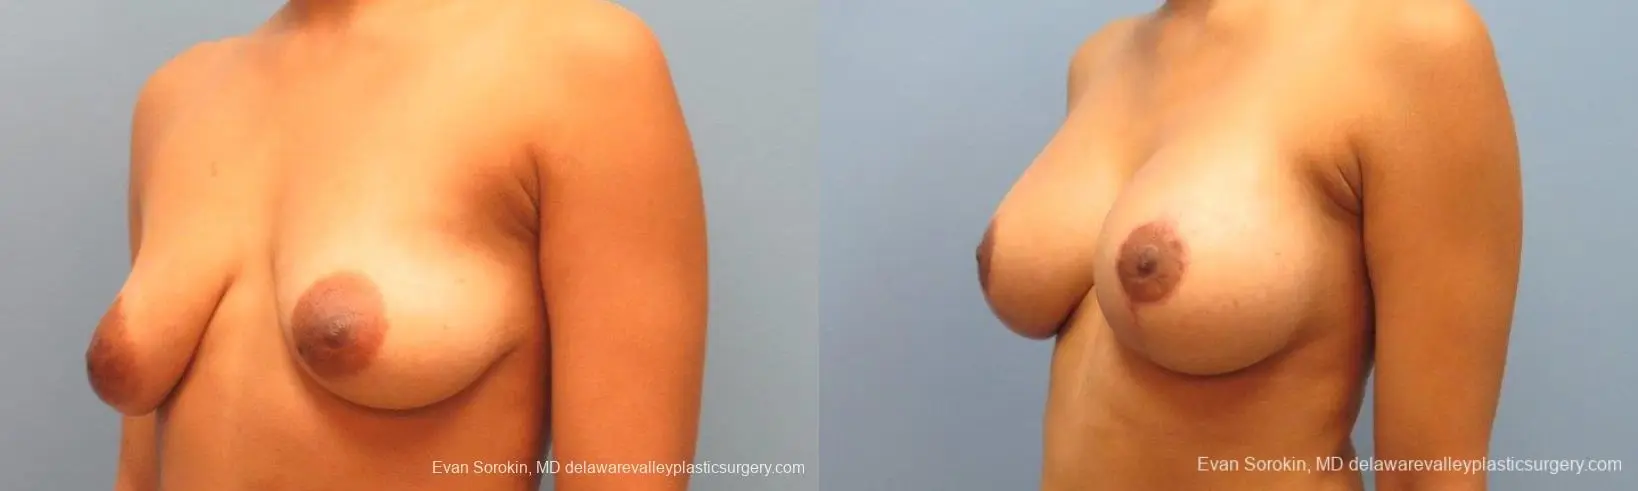 Philadelphia Breast Lift and Augmentation 10119 - Before and After 4